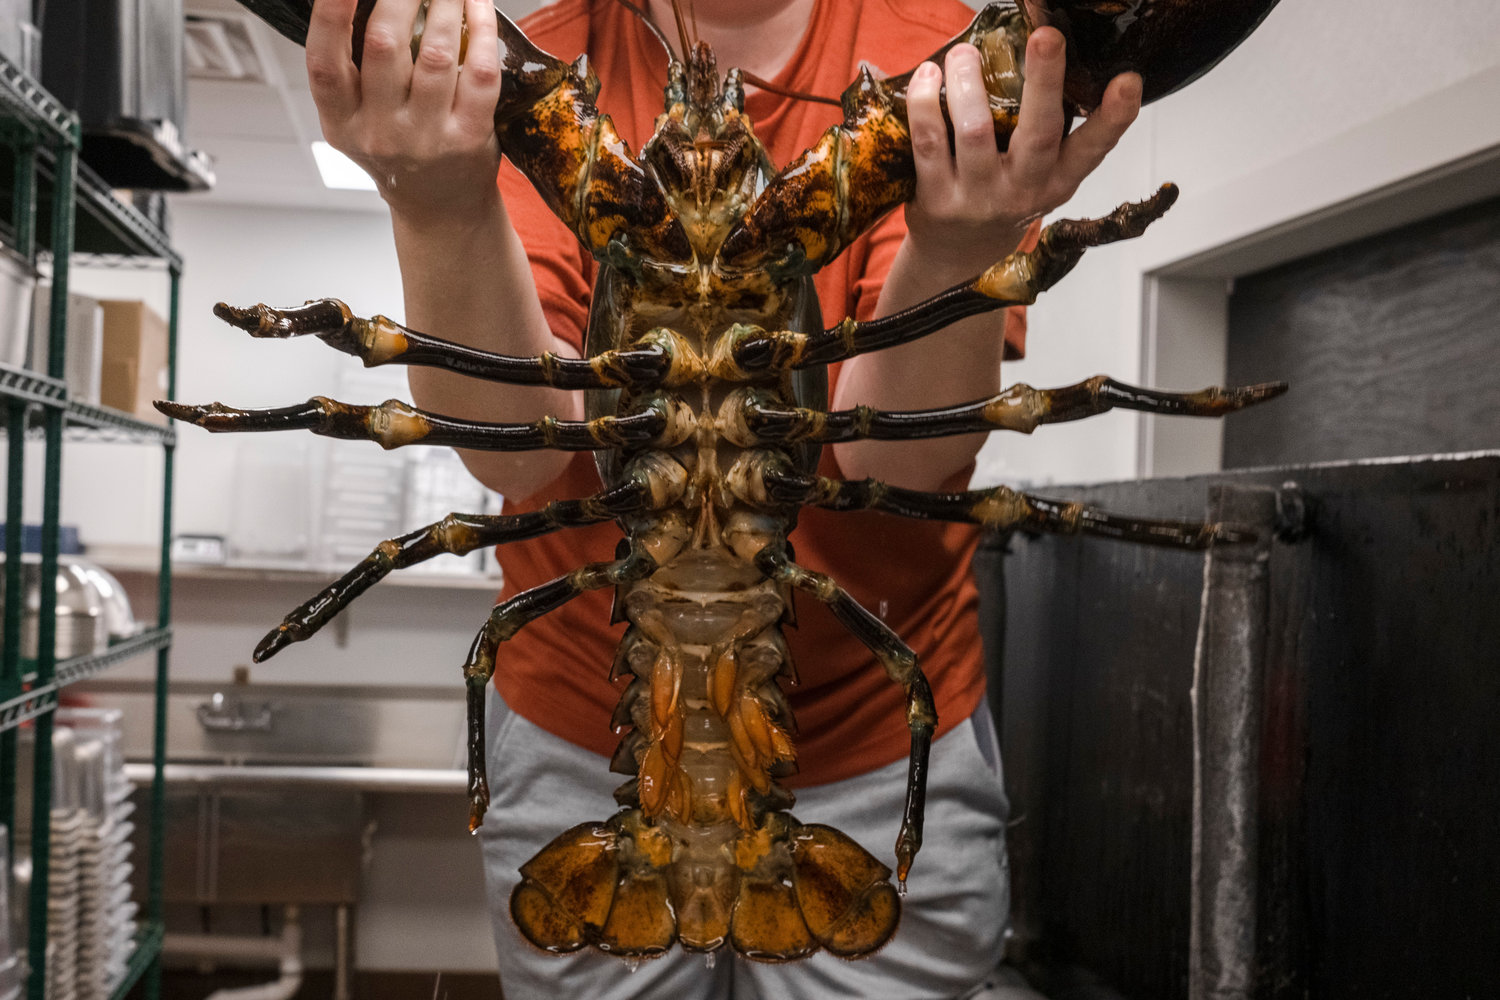 Krystal Lawrence, who is holding Biggie, said based on her research of lobsters over six months that you should never lift a live lobster by its stomach. The shell there is soft and will crush, so it's best to hold or carry a live lobster by the claws.